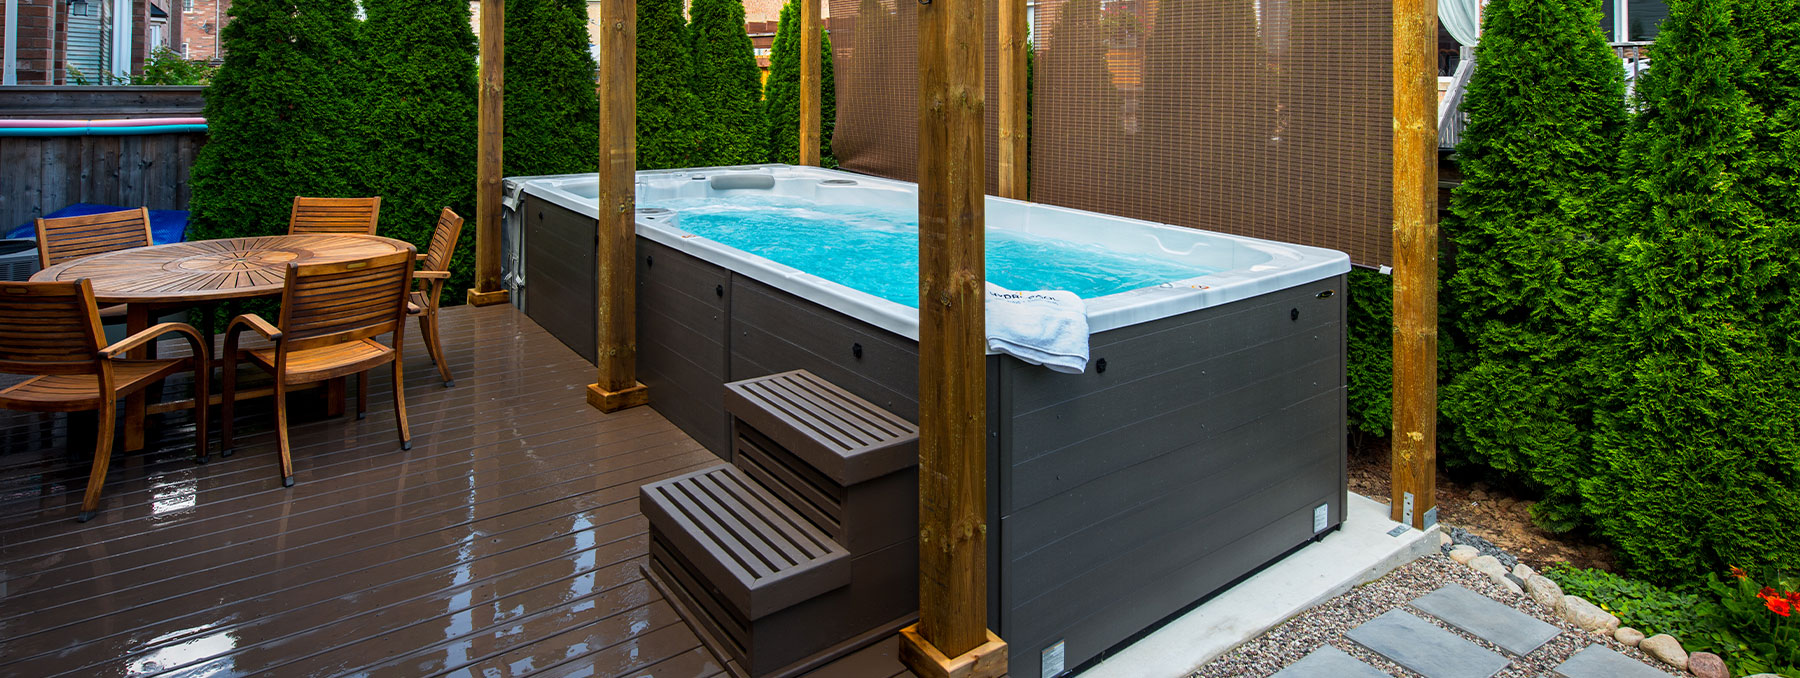 Do Swim Spas Have Features that Hot Tubs Don’t Besides the Current?